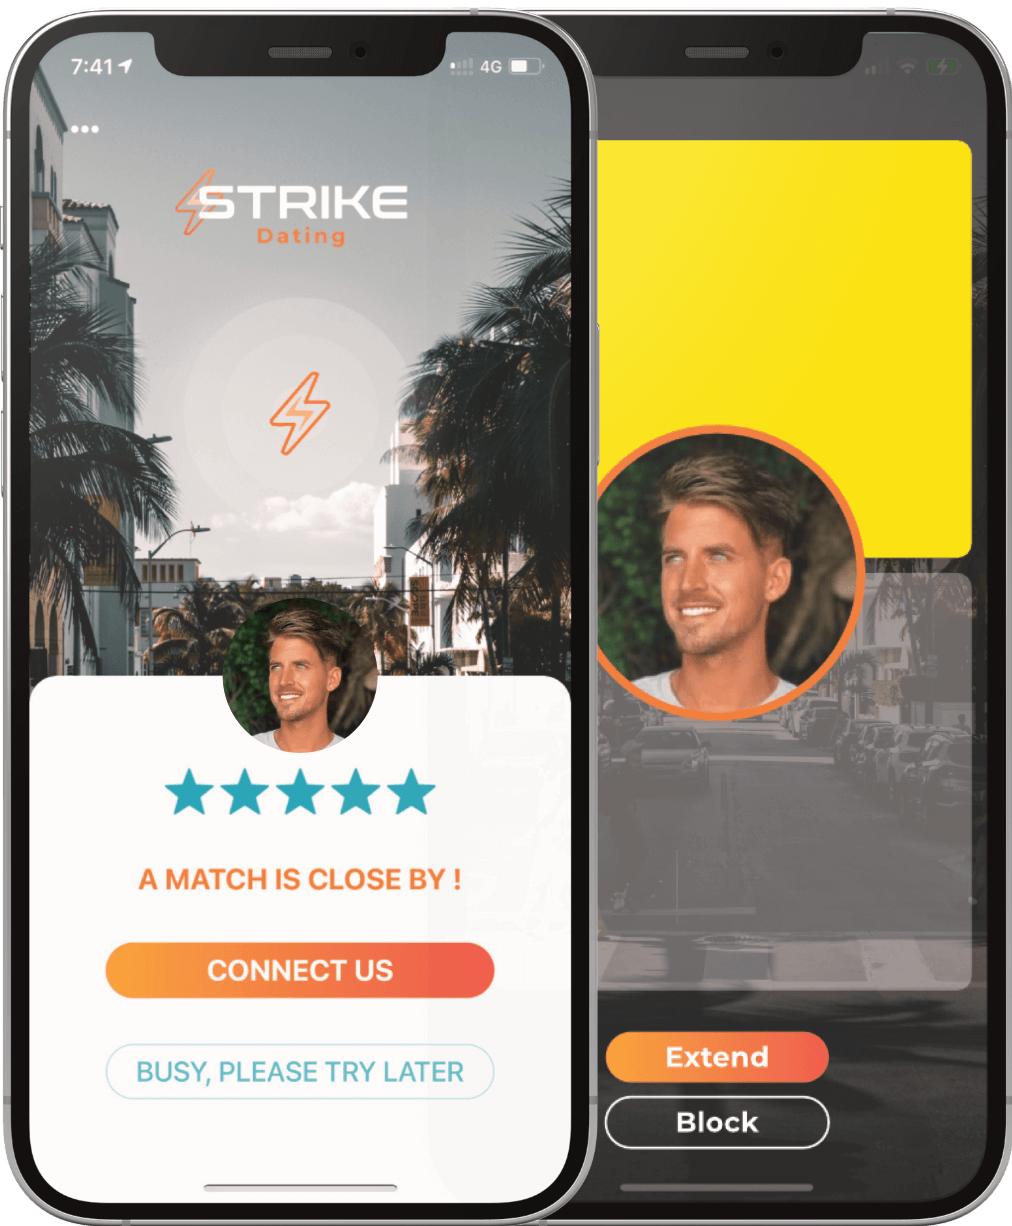 Strike Dating App - When a math is nearby.